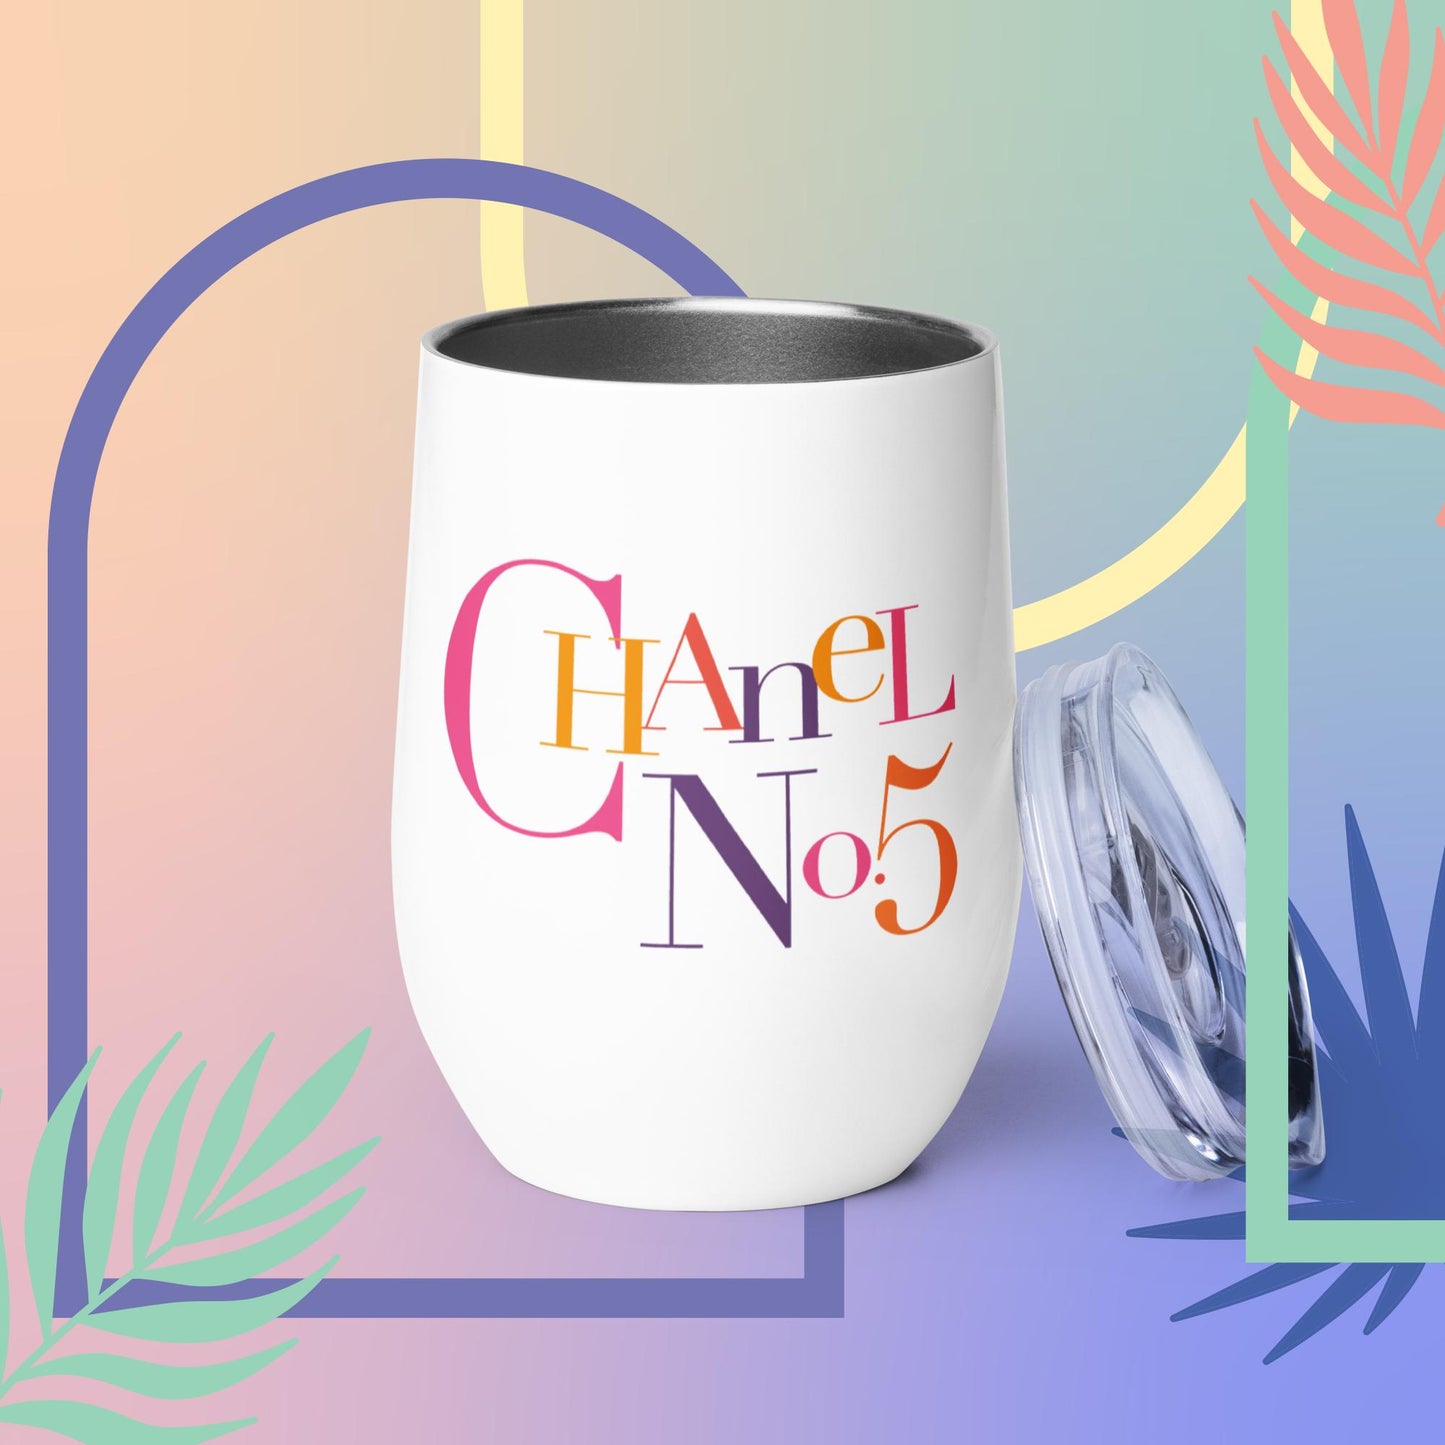 An absolutely fabulous wine tumbler for your CHANEL No. 5, sweetie